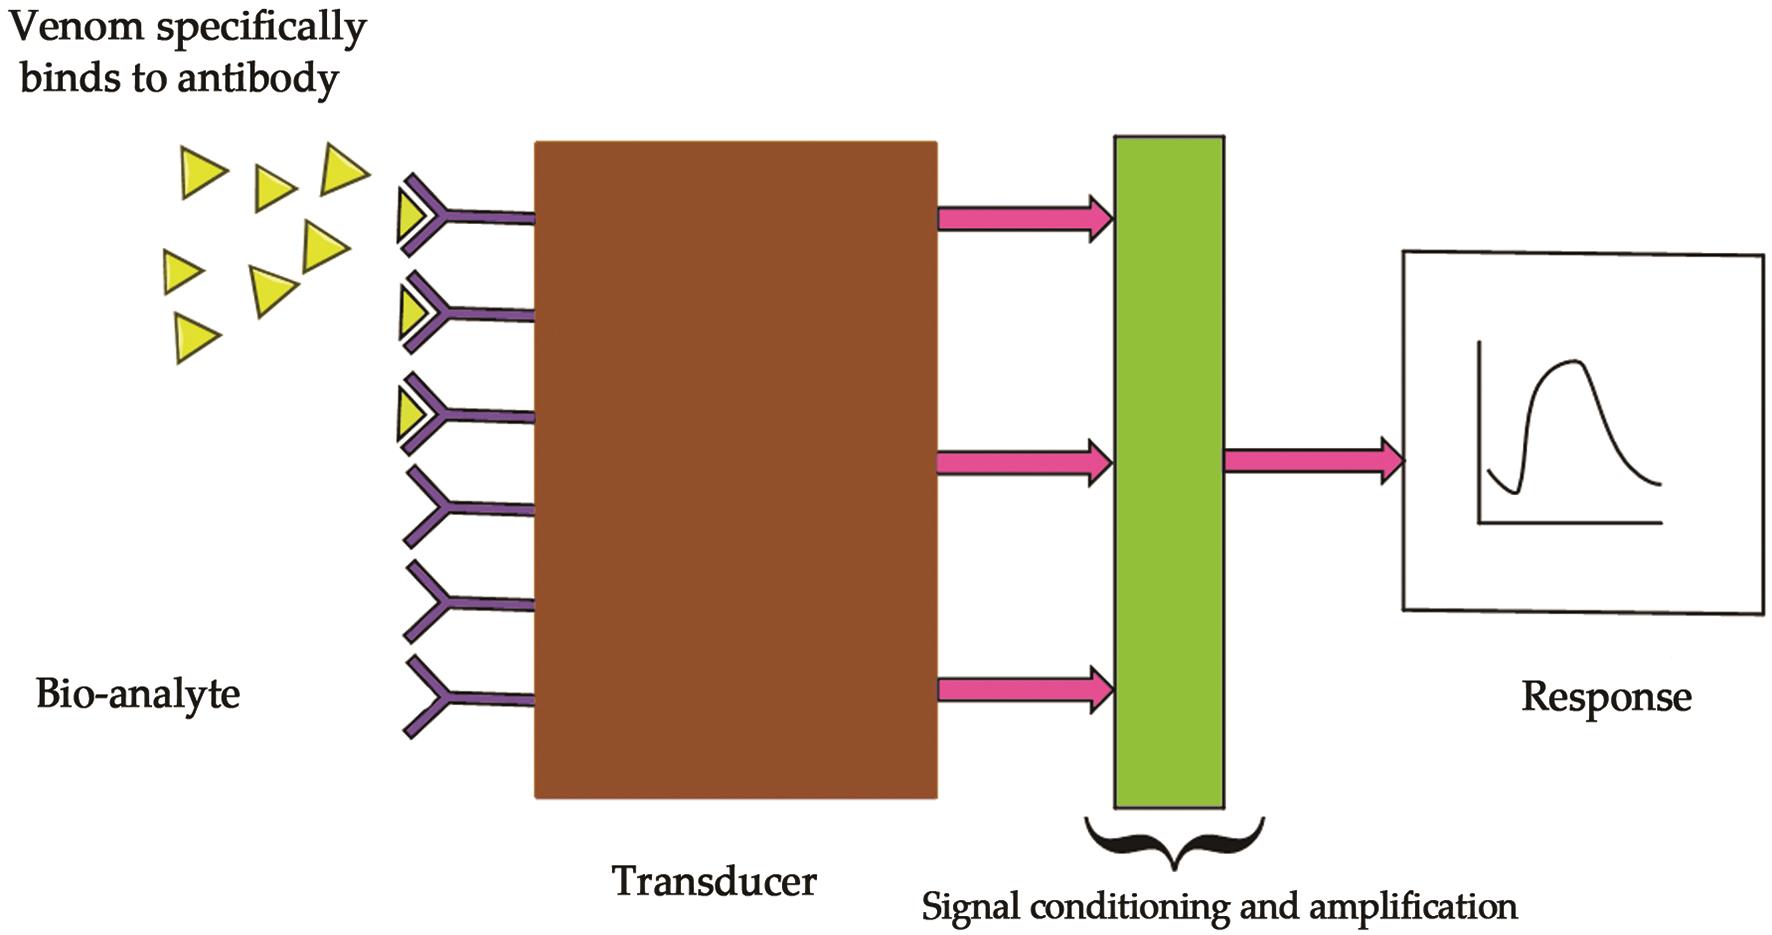 Block diagram of the biosensor showing the immobilization of different antivenom antibodies on the transducer surface.